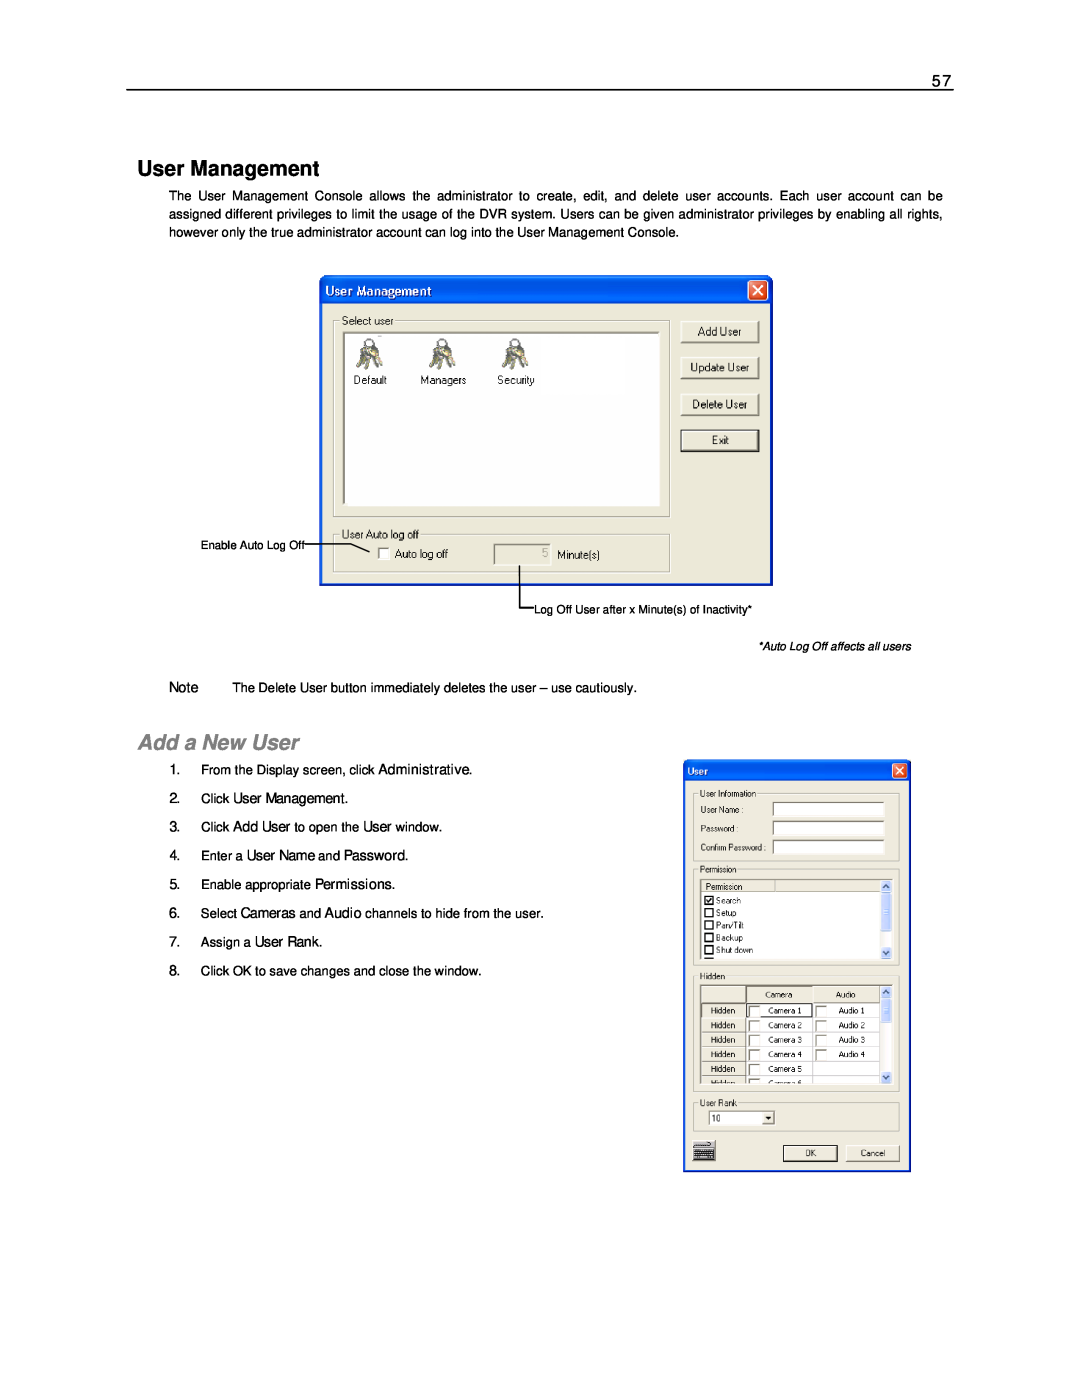 Toshiba NVS32-X, NVS16-X, NVS8-X user manual Add a New User, Click User Management, Enter a User Name and Password 